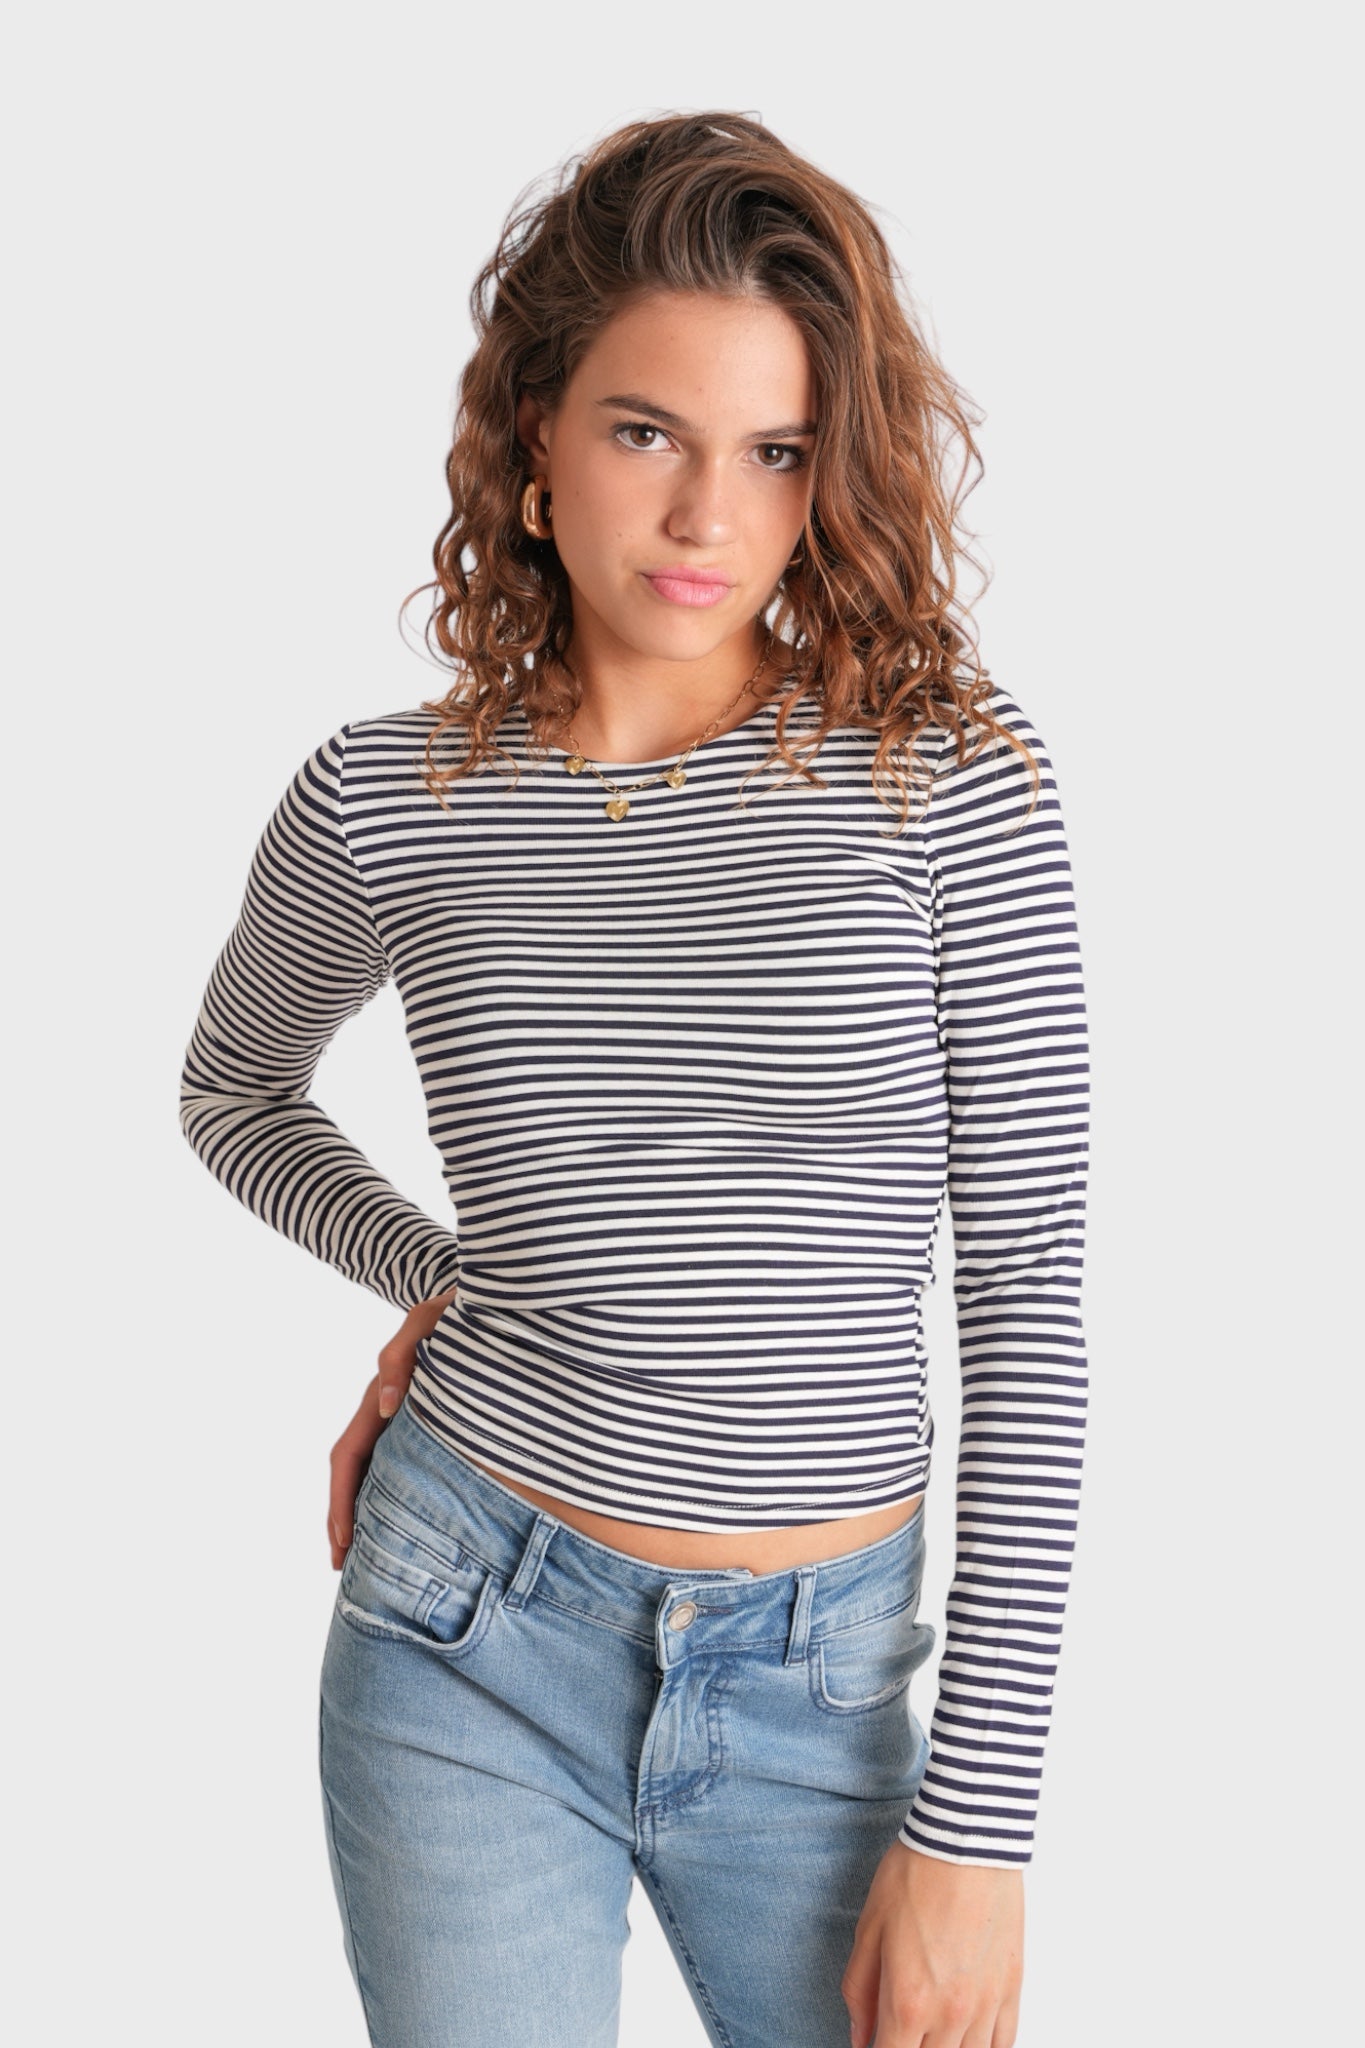 "Muse" top striped navy